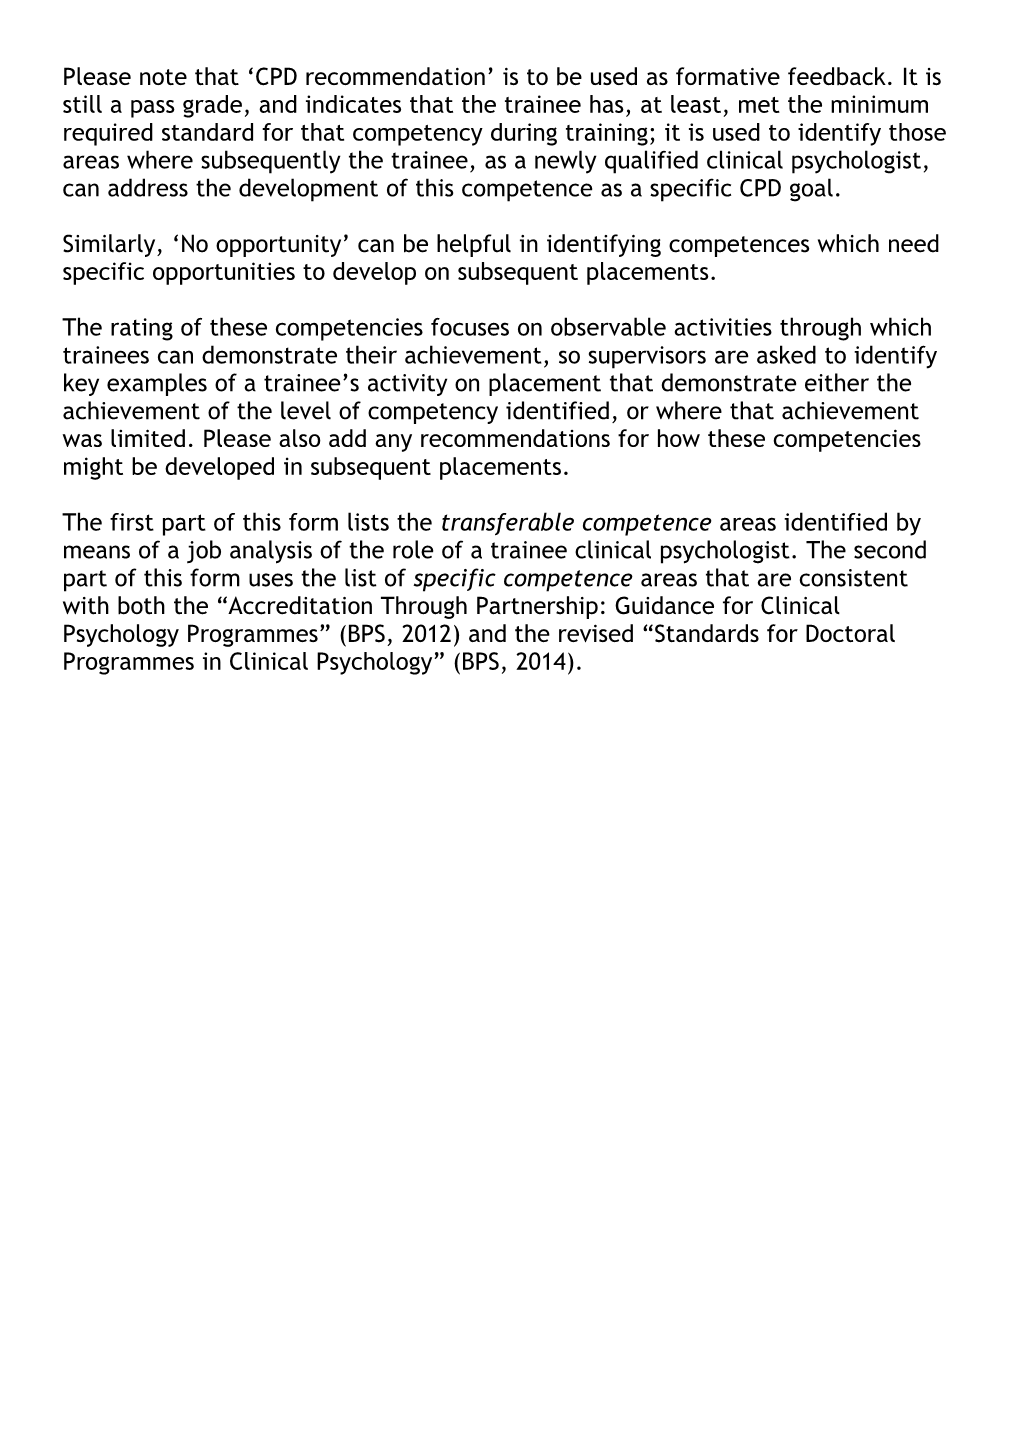 Universities of Manchester, Liverpool and Lancaster Doctoral Programmes in Clinical Psychology